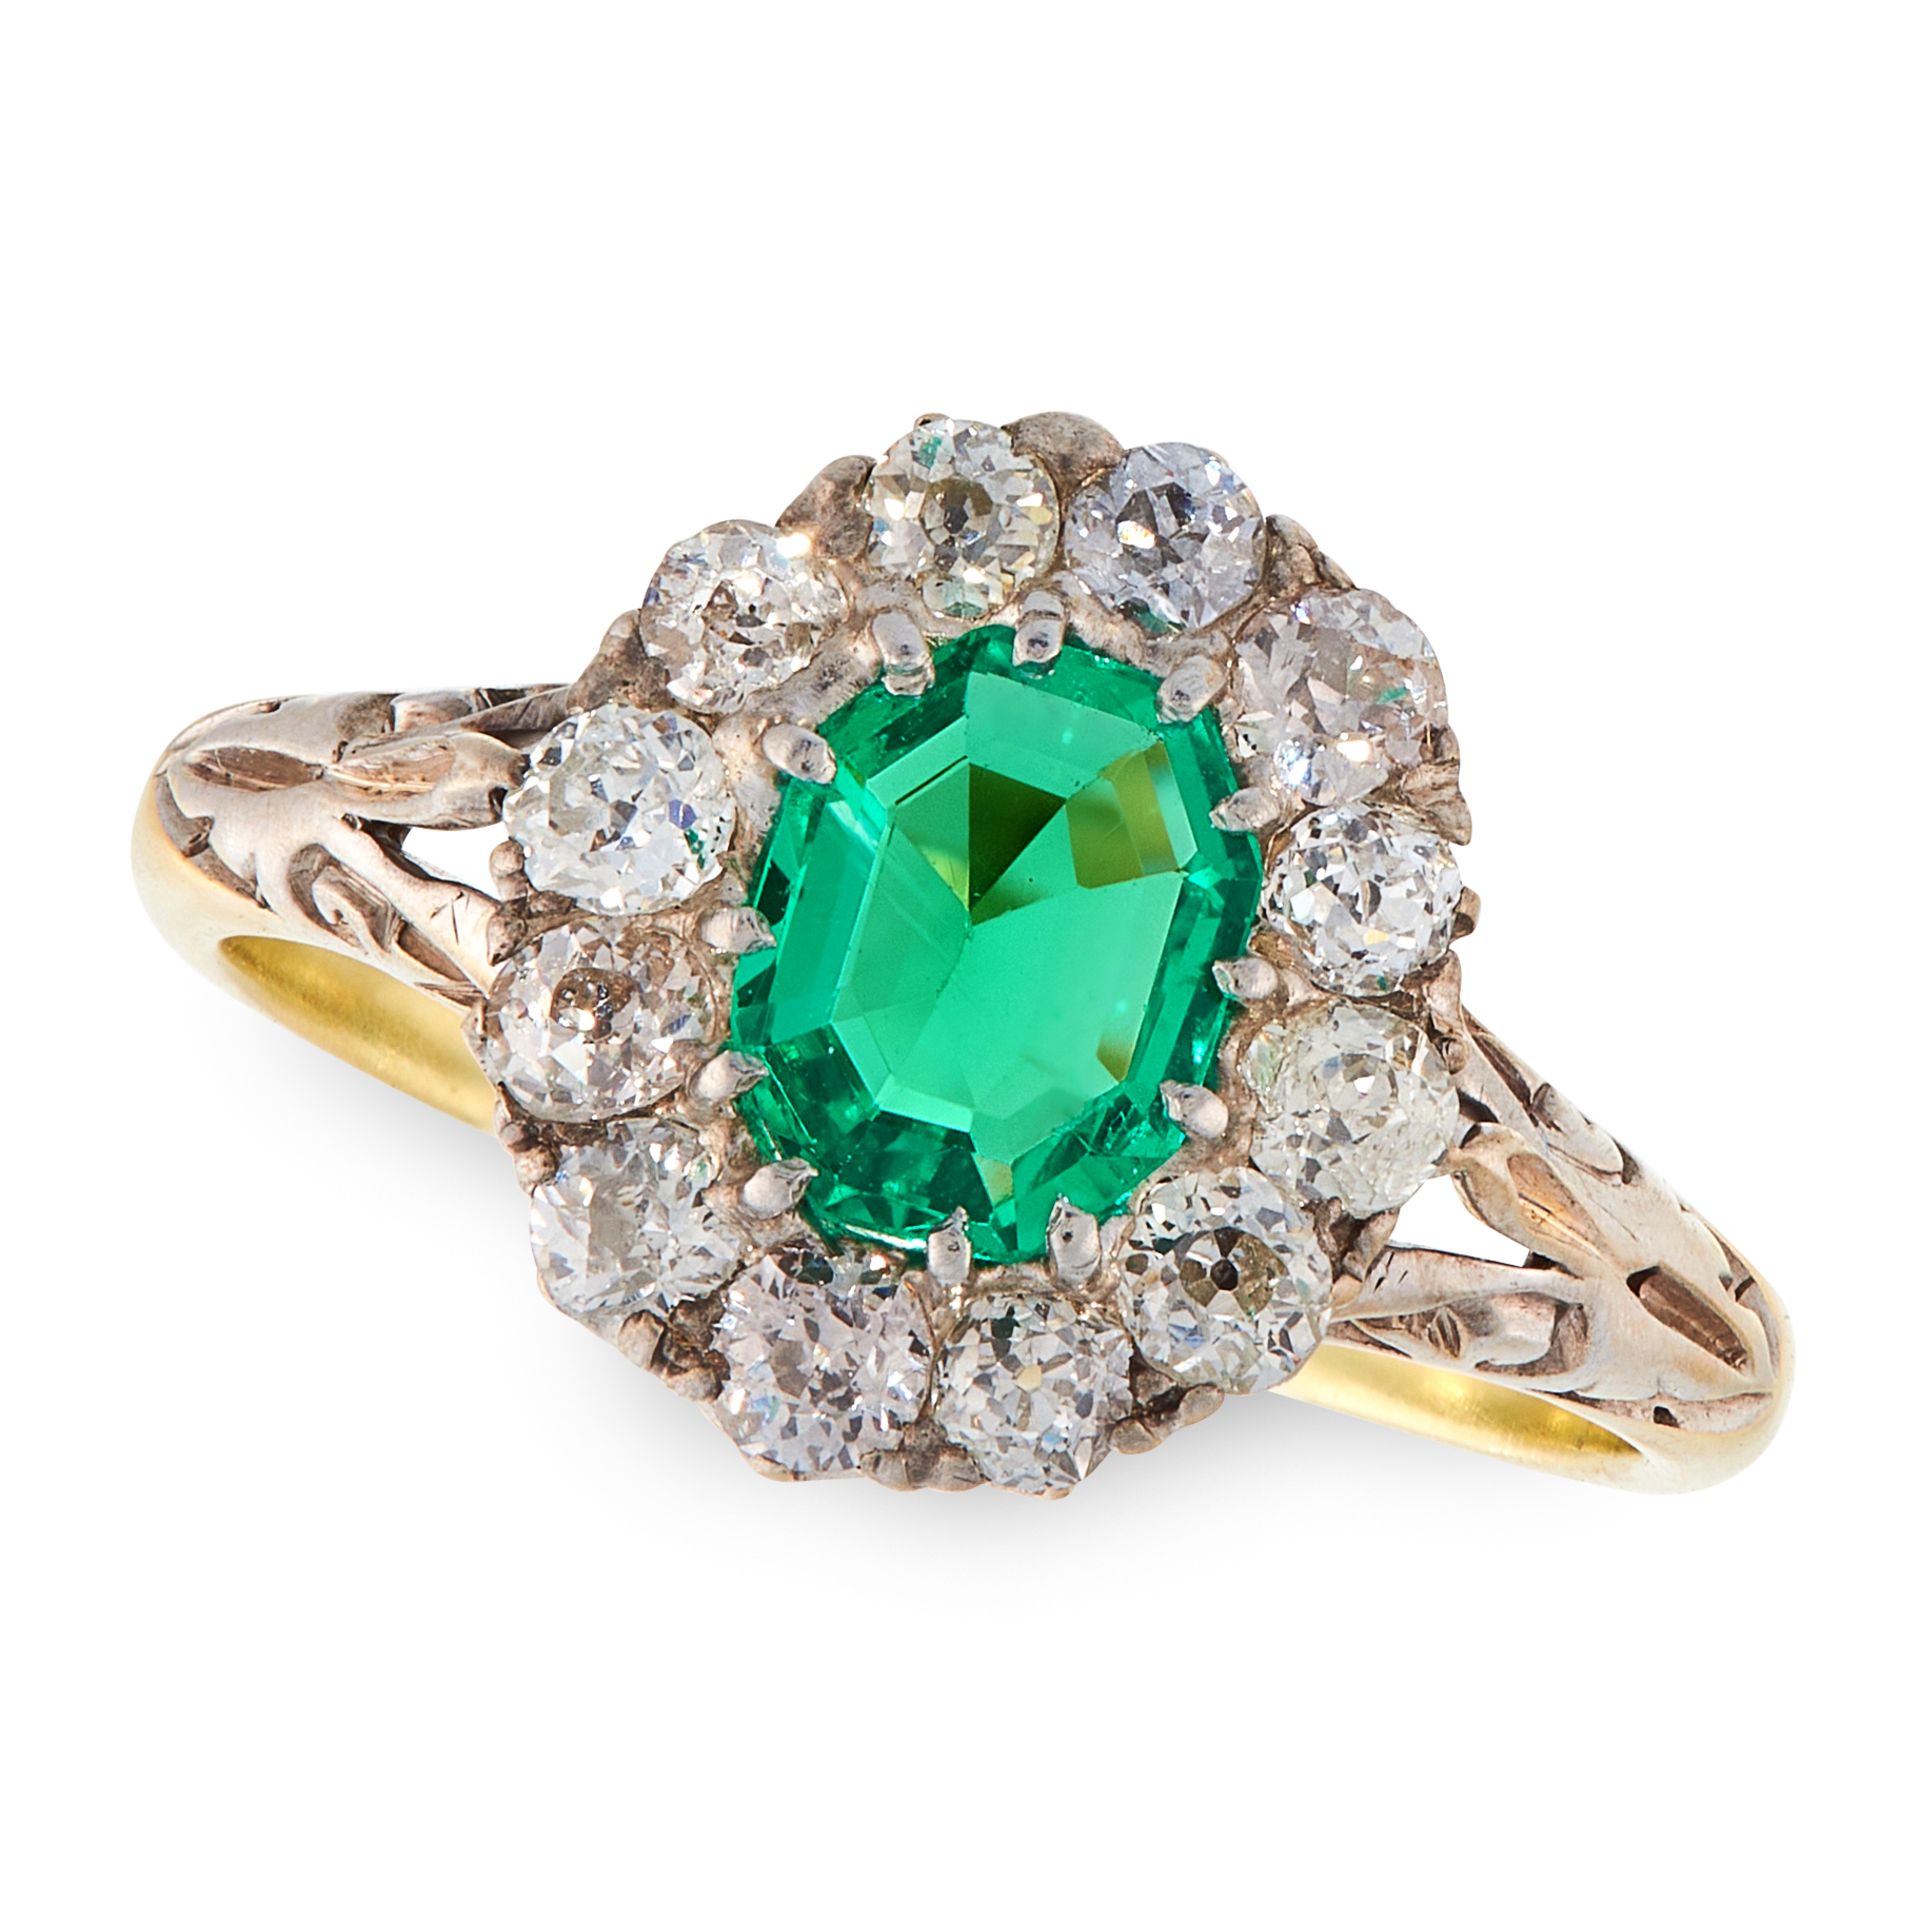 A COLOMBIAN EMERALD AND DIAMOND RING in high carat yellow gold, set with an emerald cut emerald of